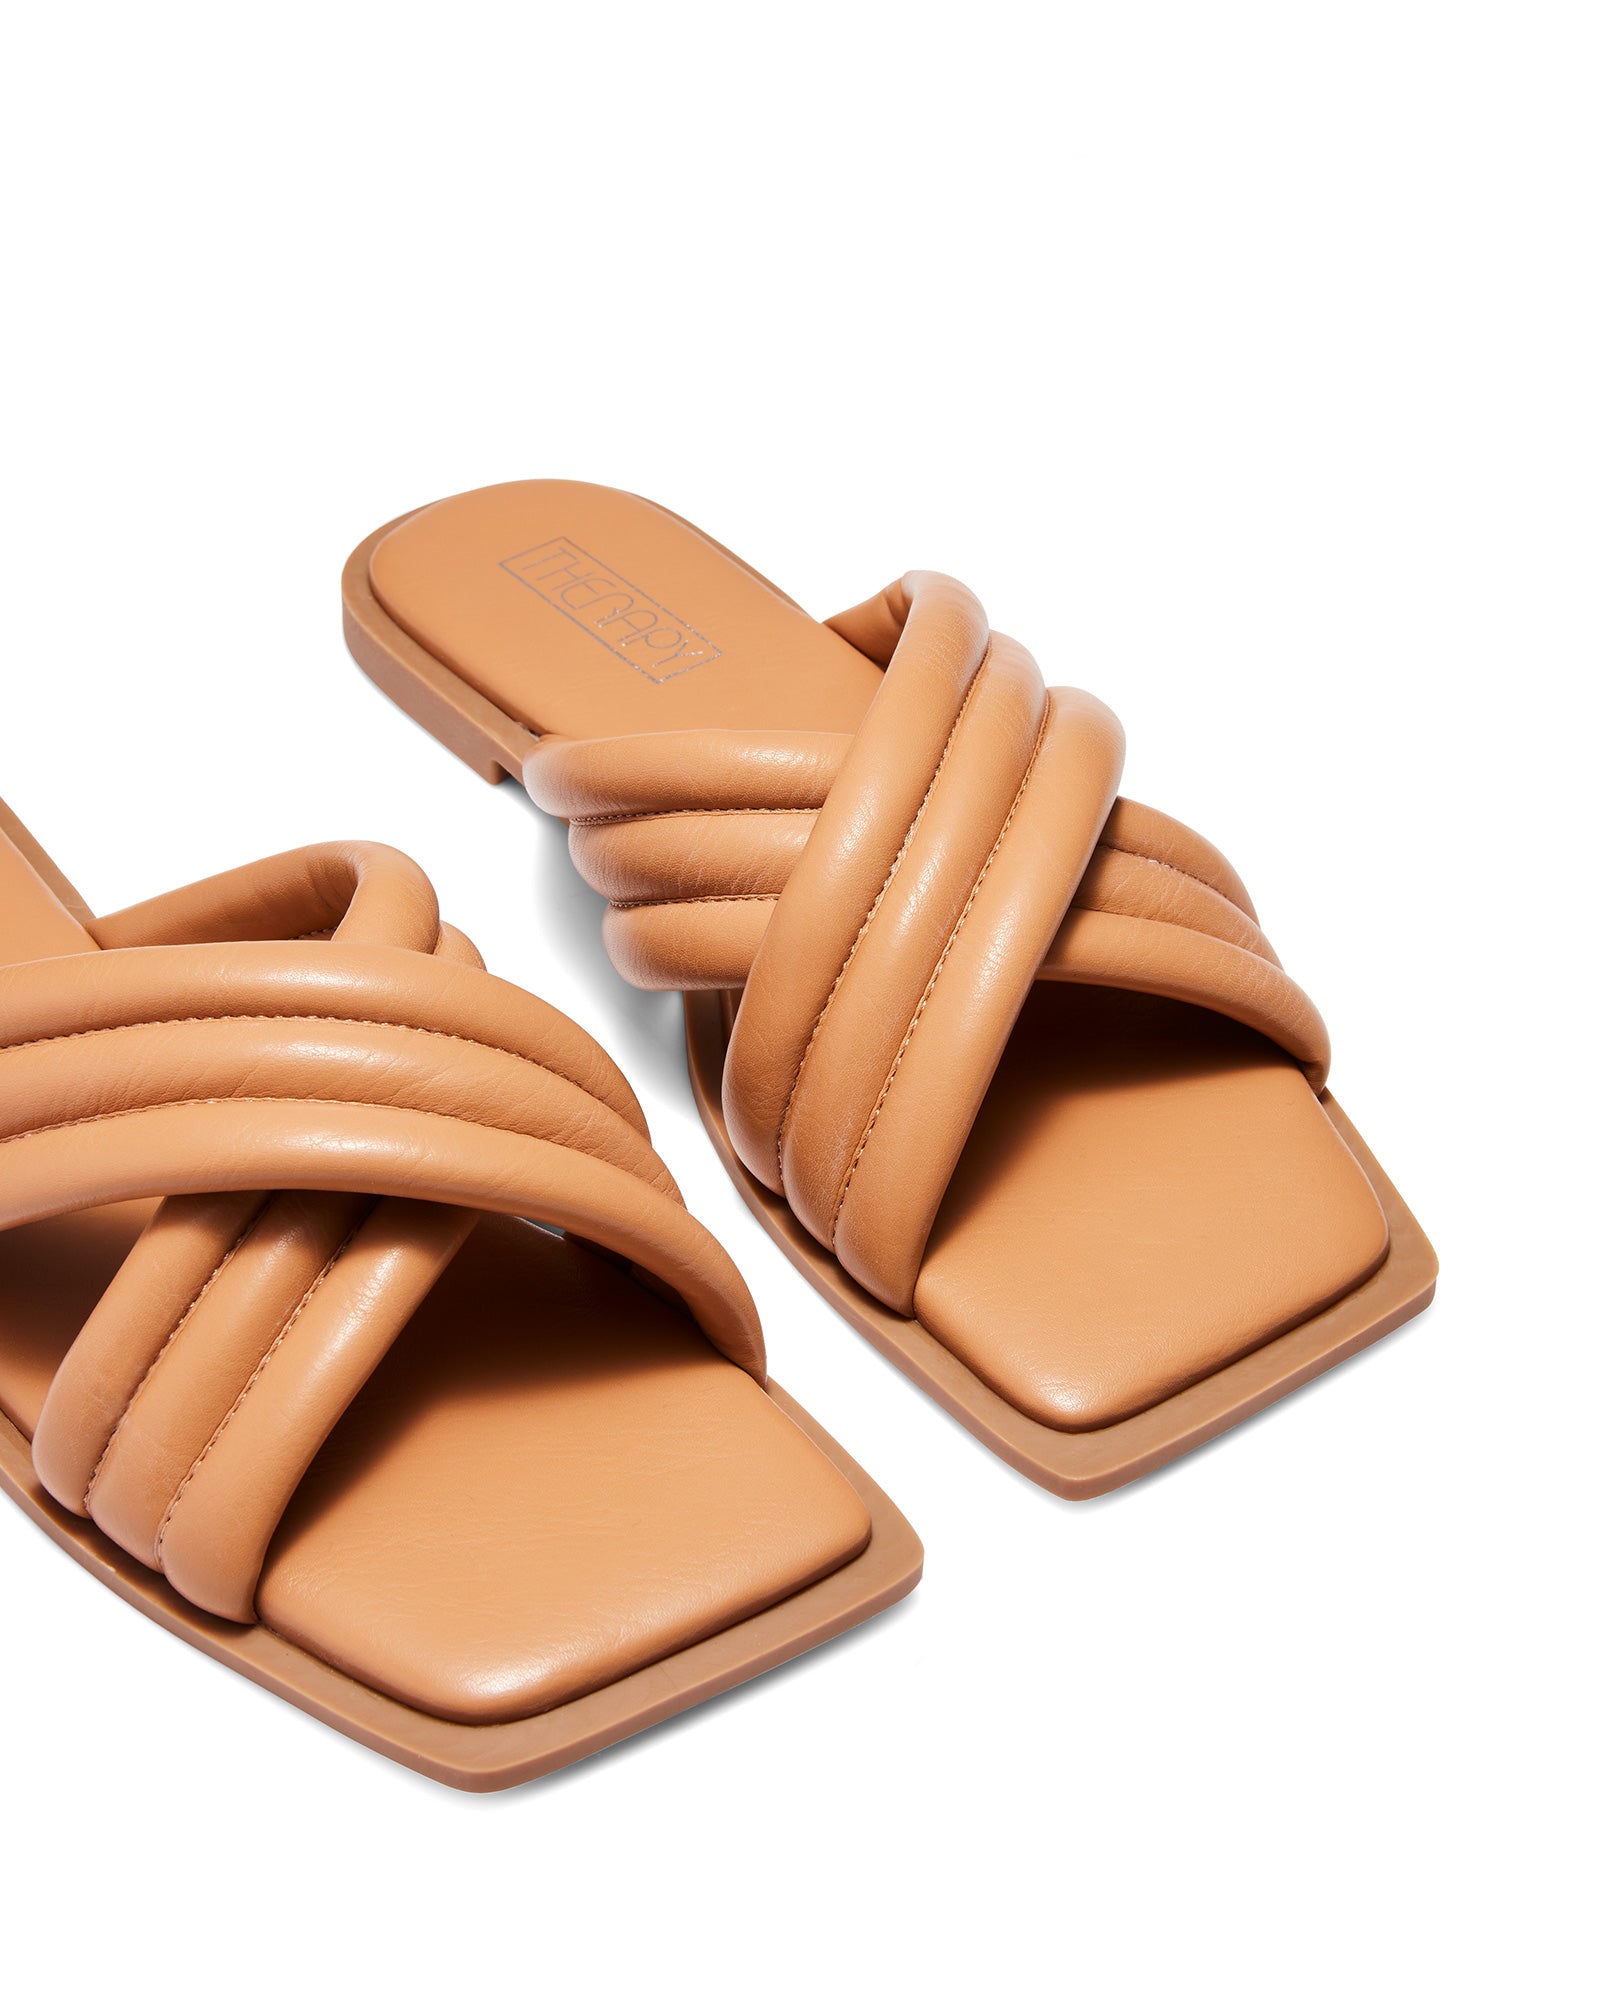 Therapy Shoes Spade Caramel | Women's Sandals | Slides | Flats | Slip On